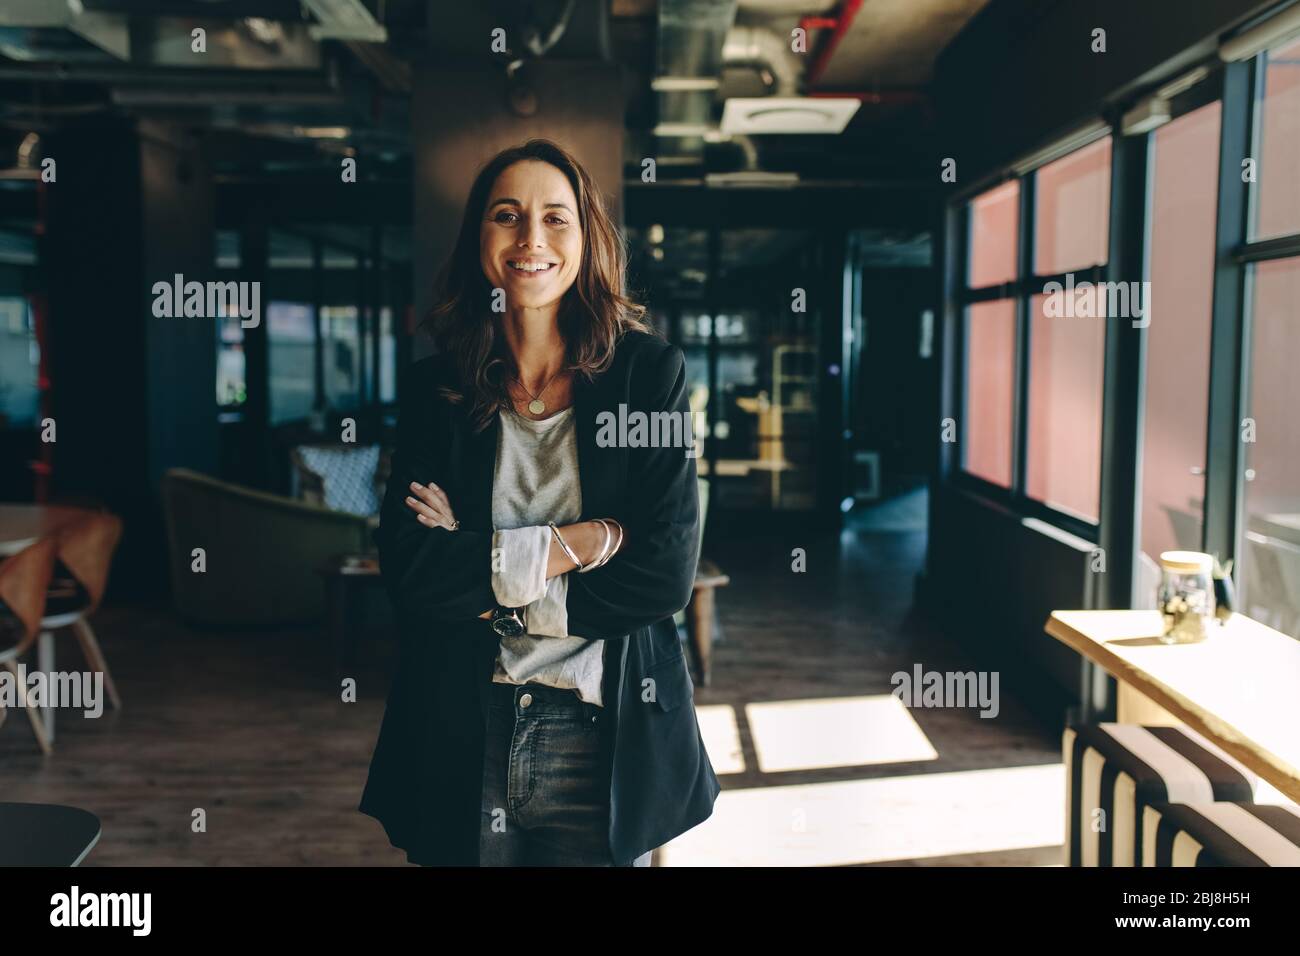 Confident businesswoman standing in office. Smiling woman standing with her arms crossed looking at camera. Stock Photo